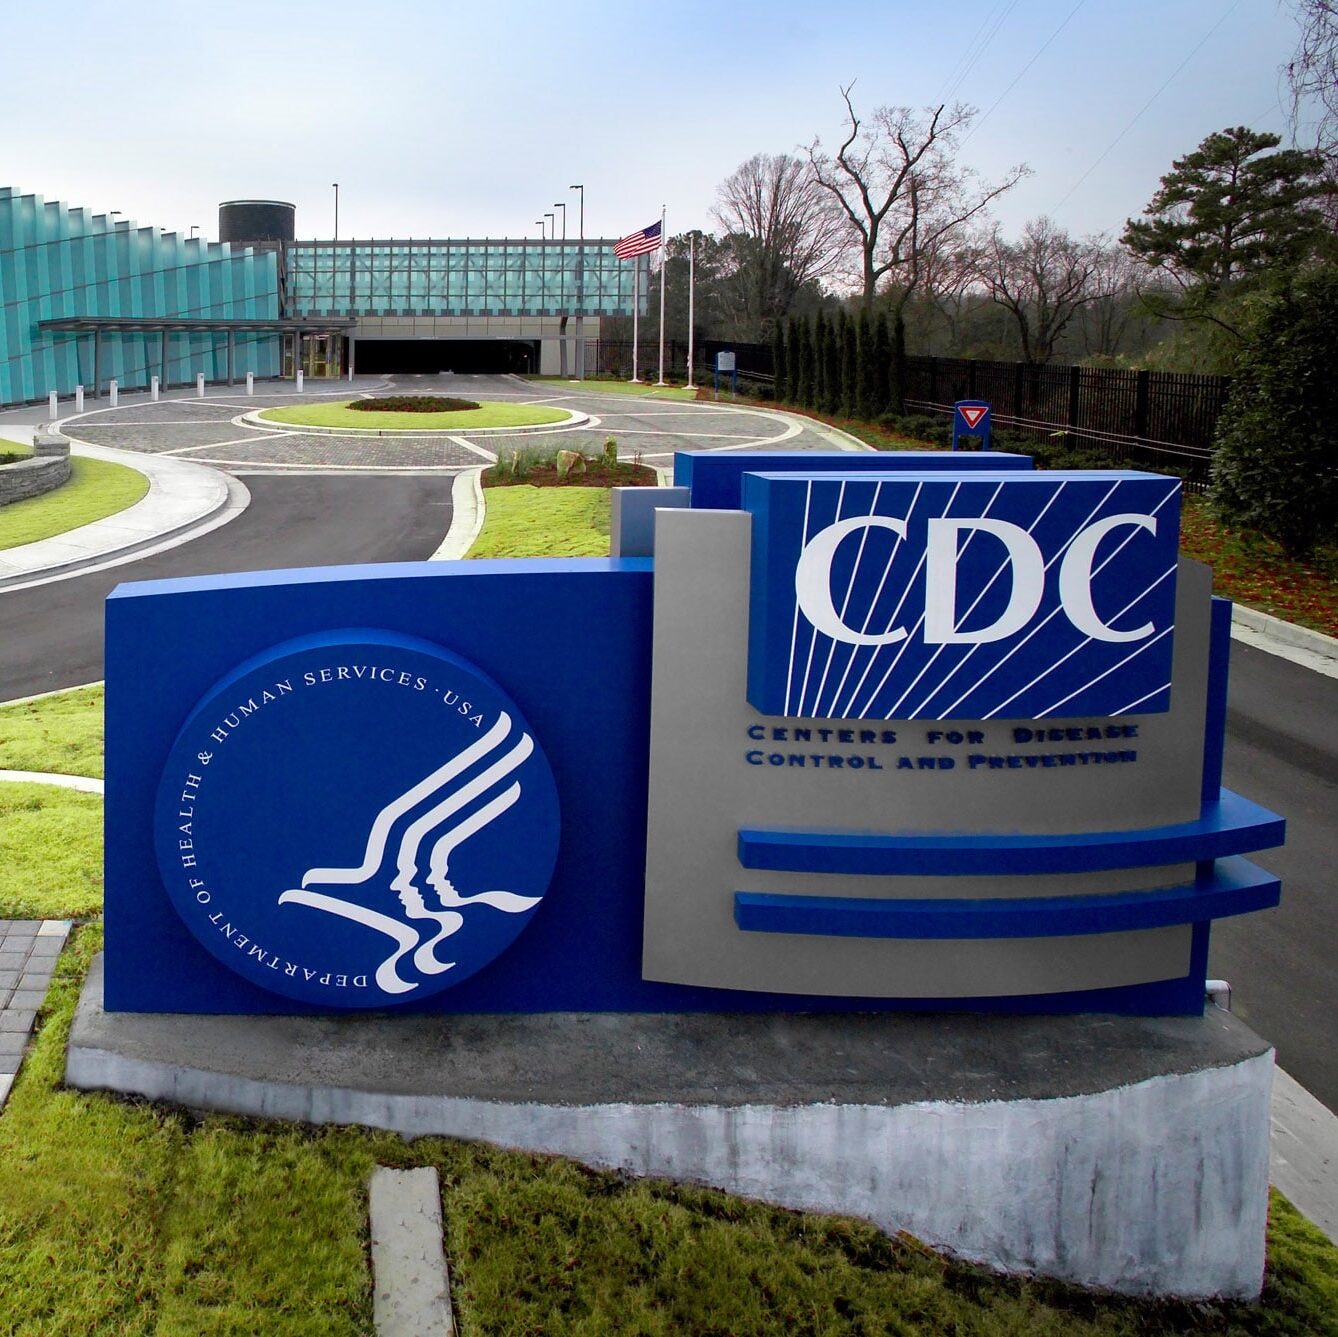 Action Alert: Make Your Voice Heard at the CDC